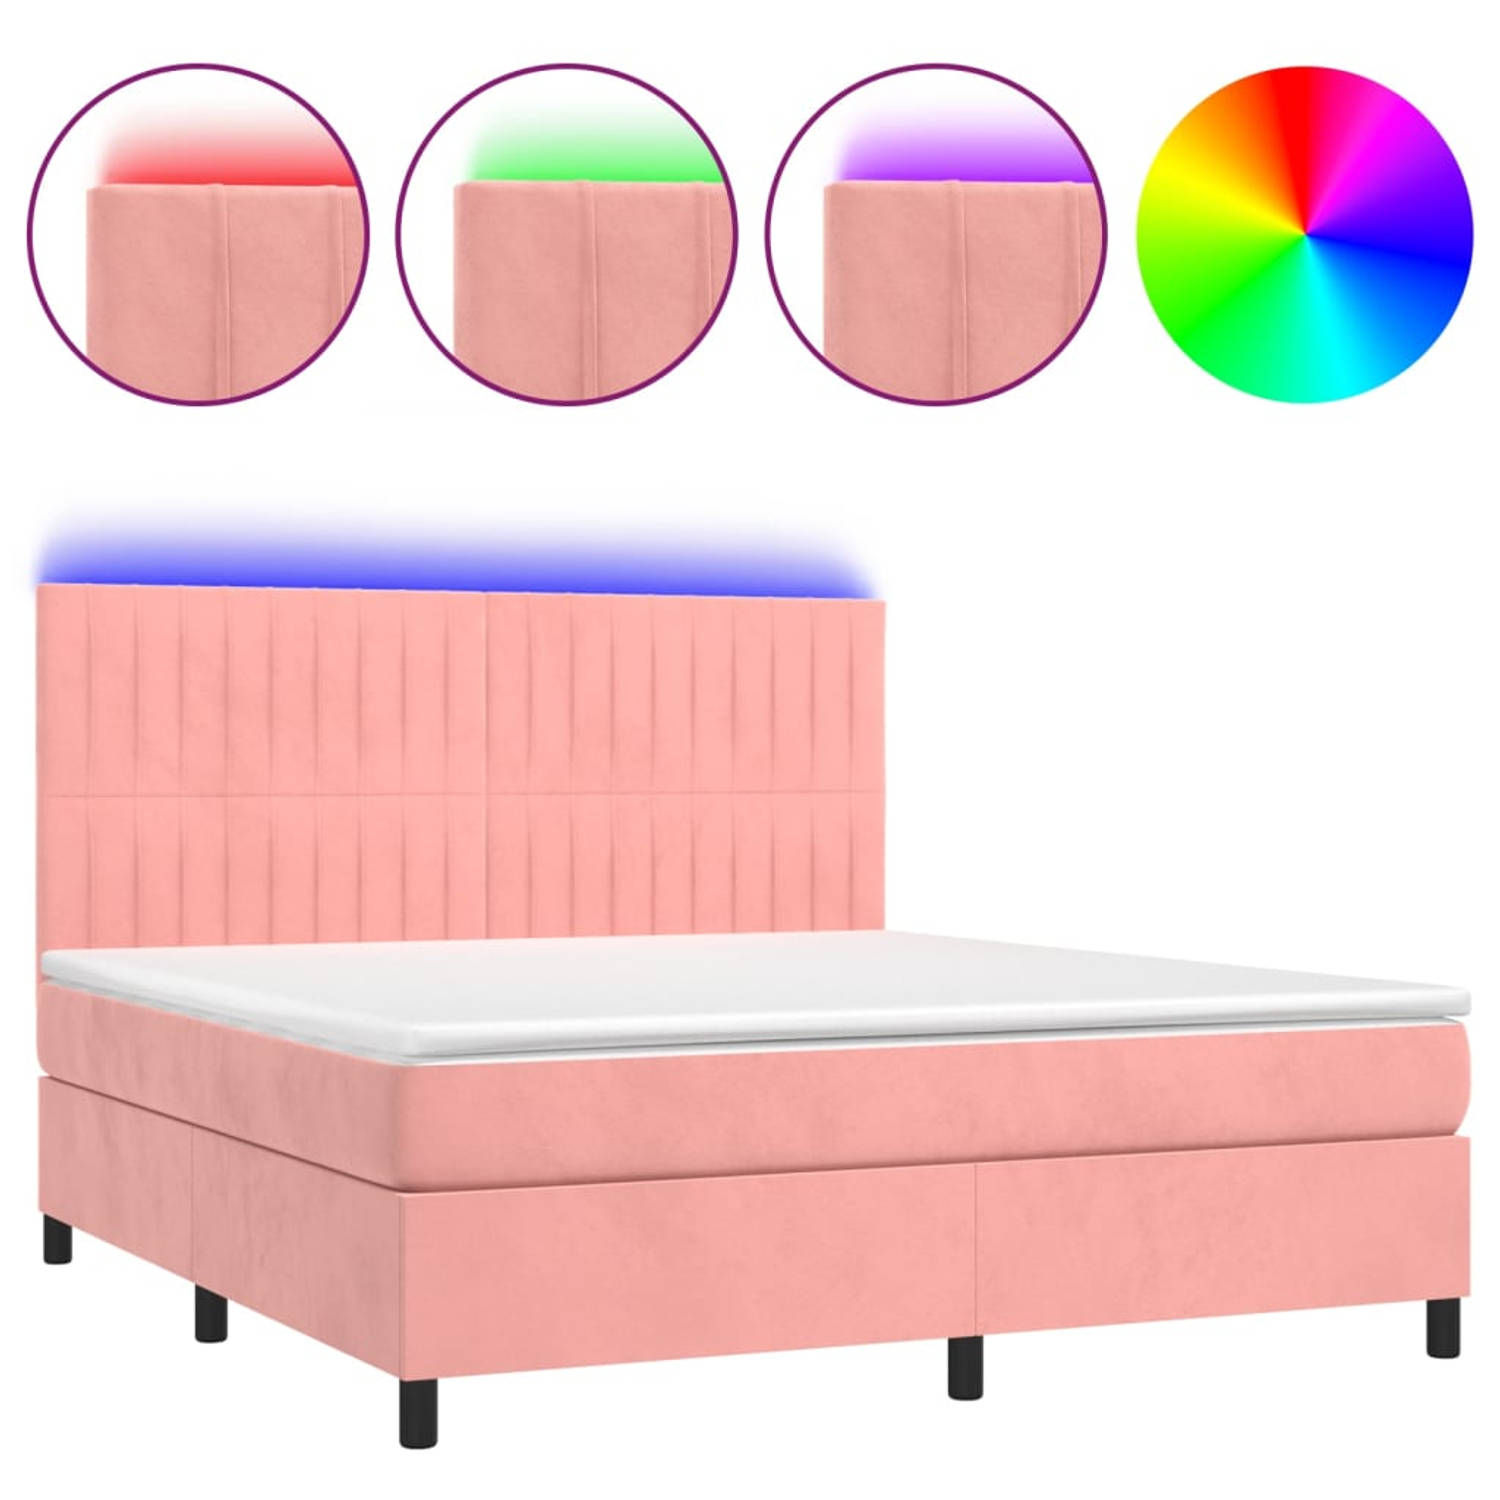 The Living Store Bed Comfort Boxspring 160x200 cm Roze Fluweel met LED